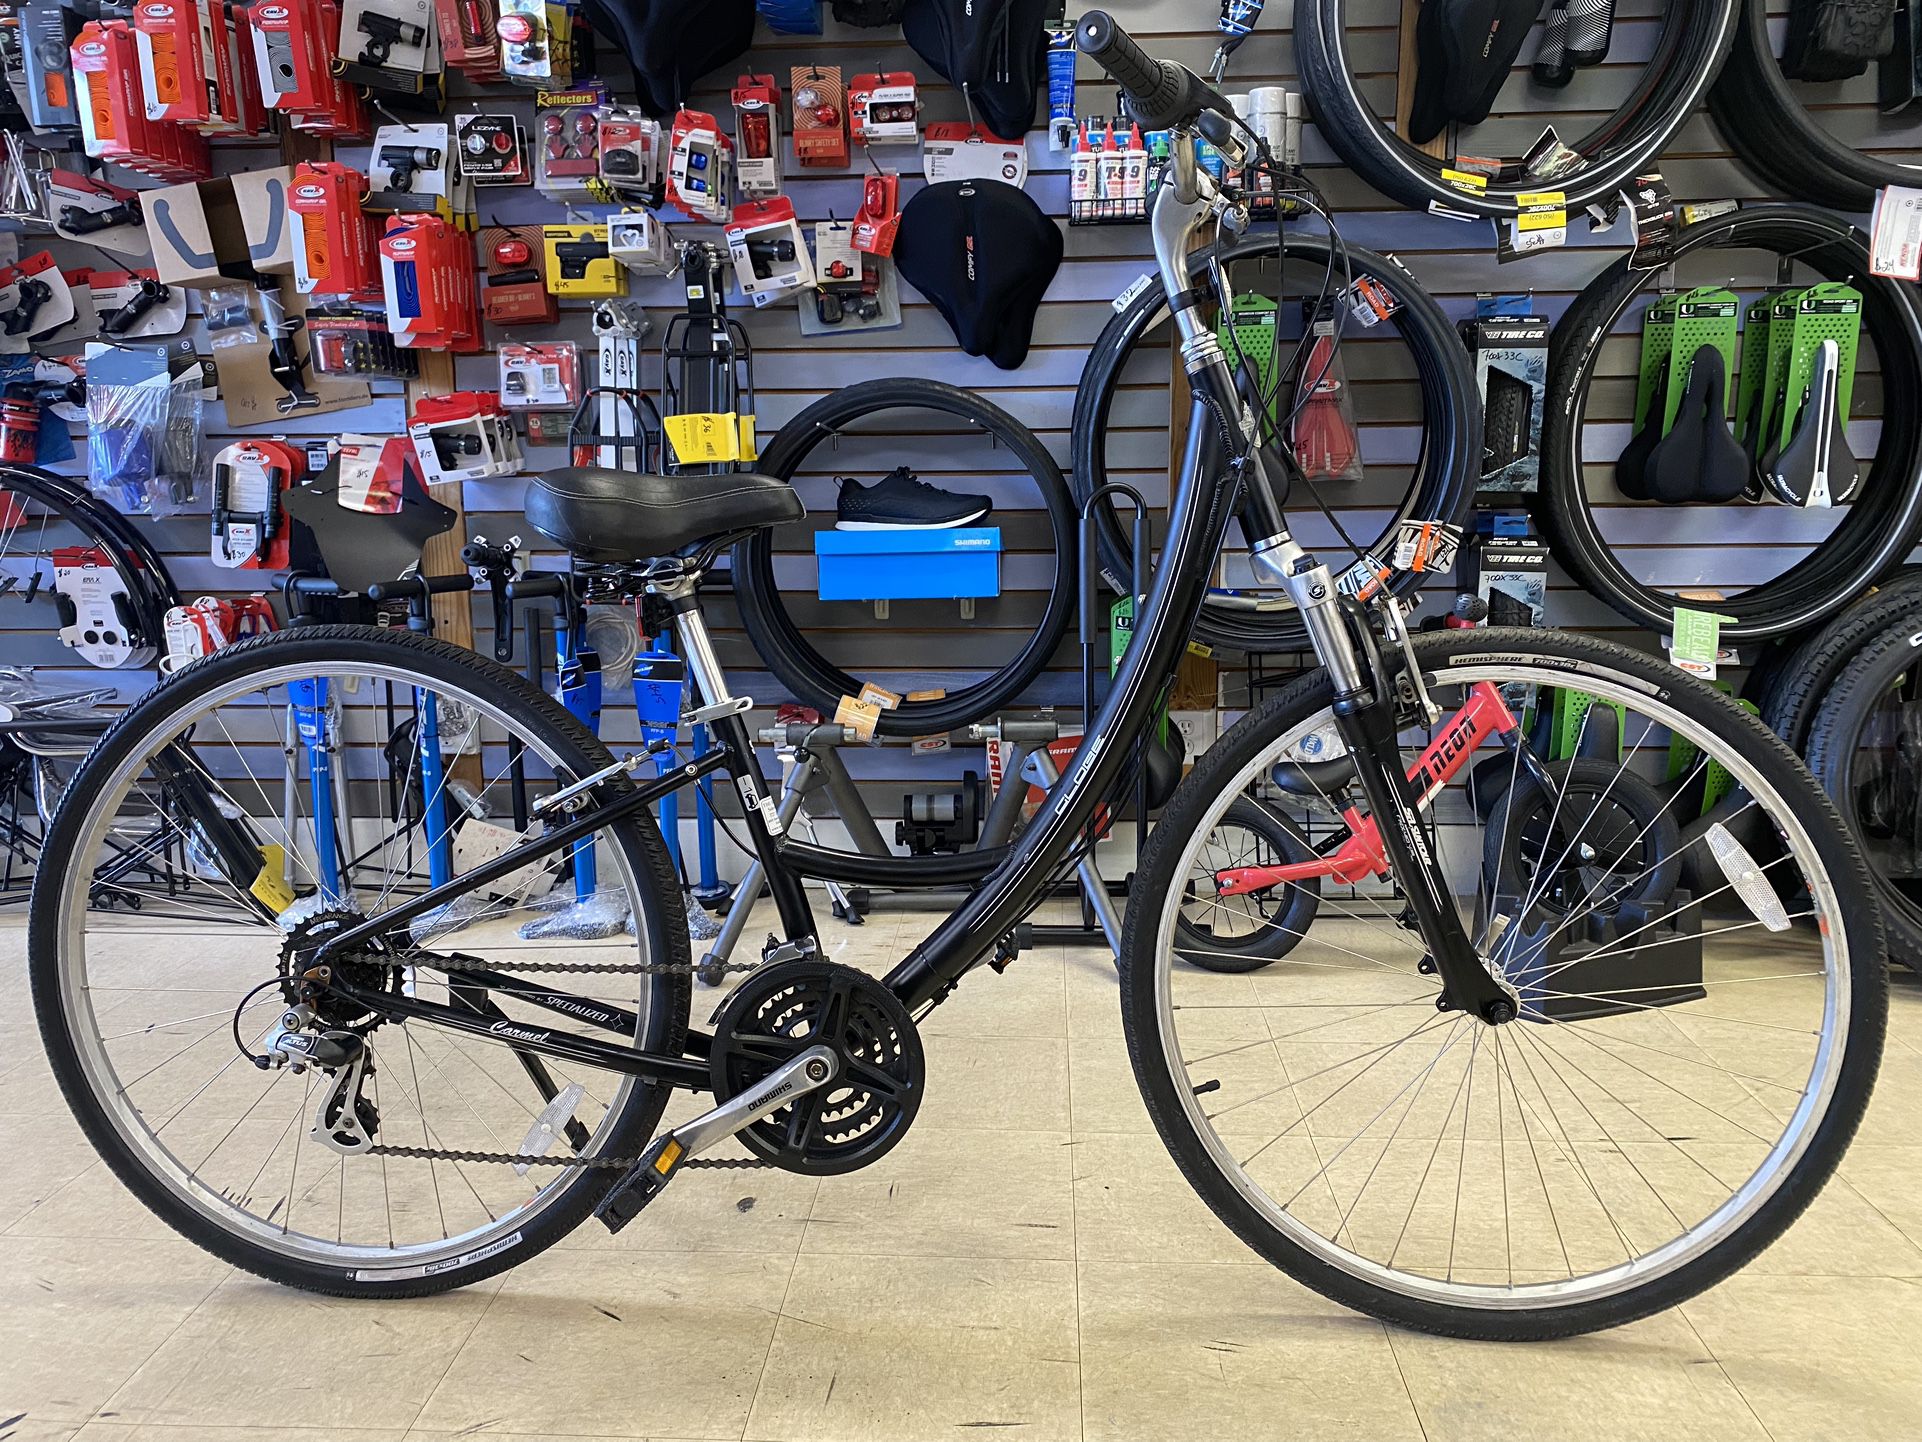 Hybrid Specialized Globe, Aluminum Frame Size 14’5” Small, Tire Size 700X38C, 21 Speeds Shimano Altus, Free Delivery